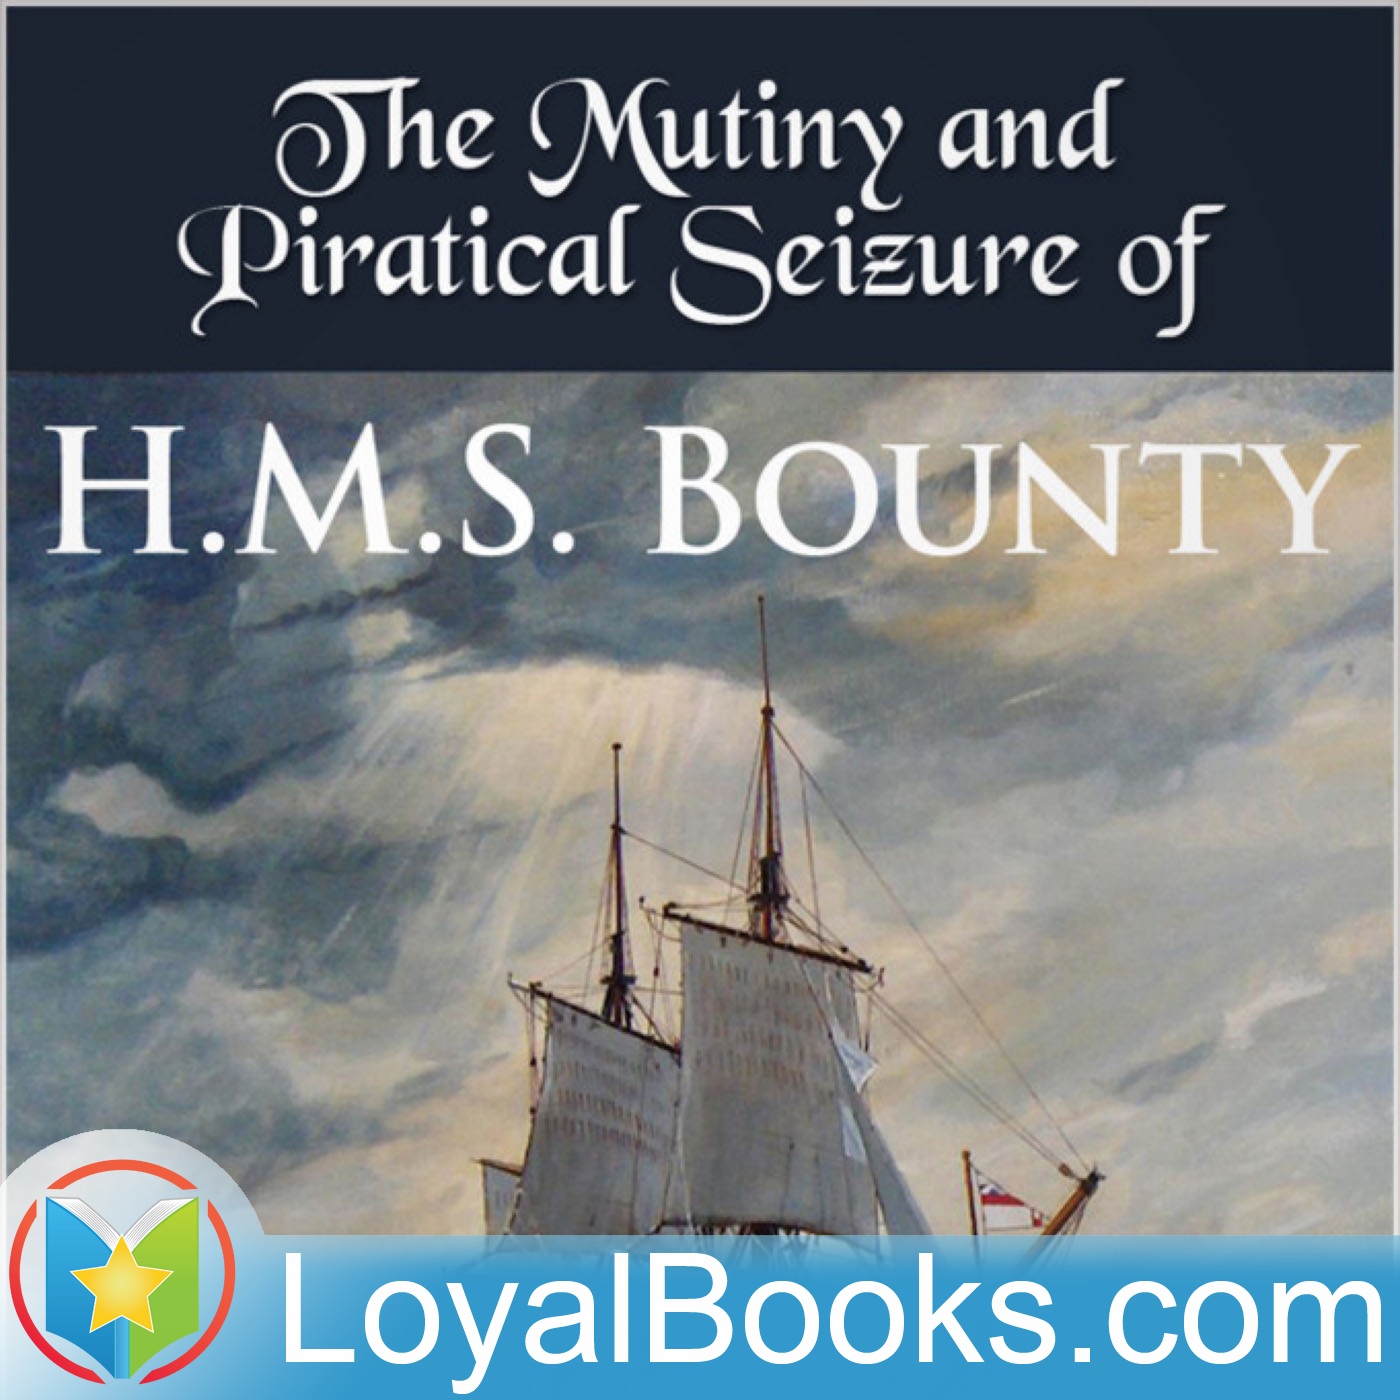 Eventful History of the Mutiny and Piratical Seizure of H.M.S. Bounty by Sir John Barrow